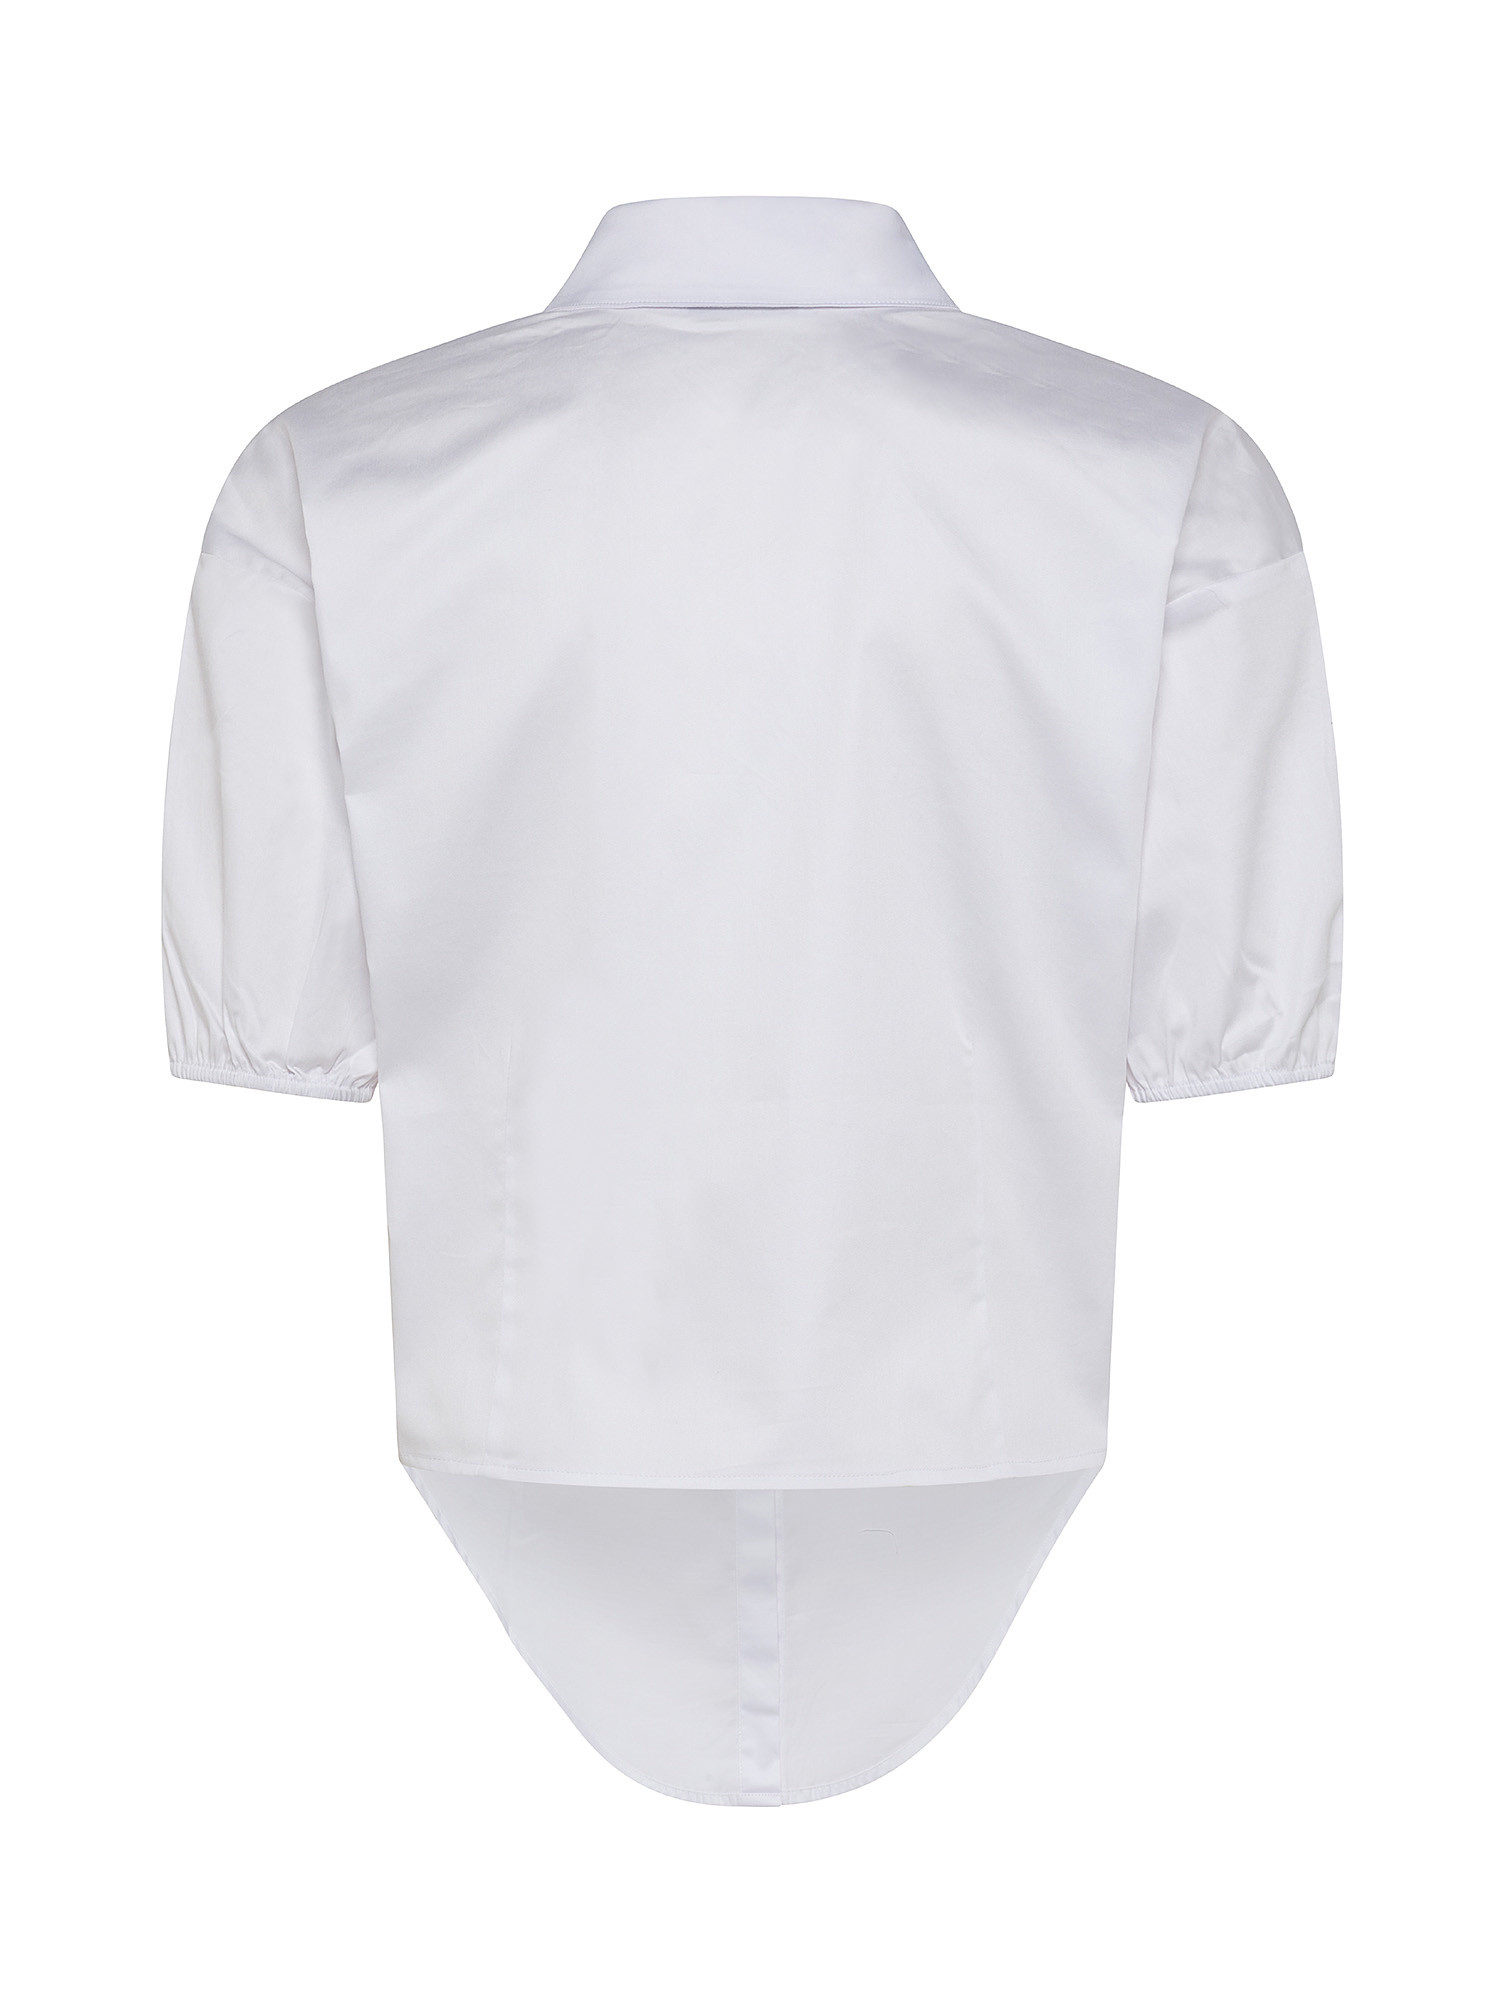 GUESS - Shirt to tie on the front, White, large image number 1